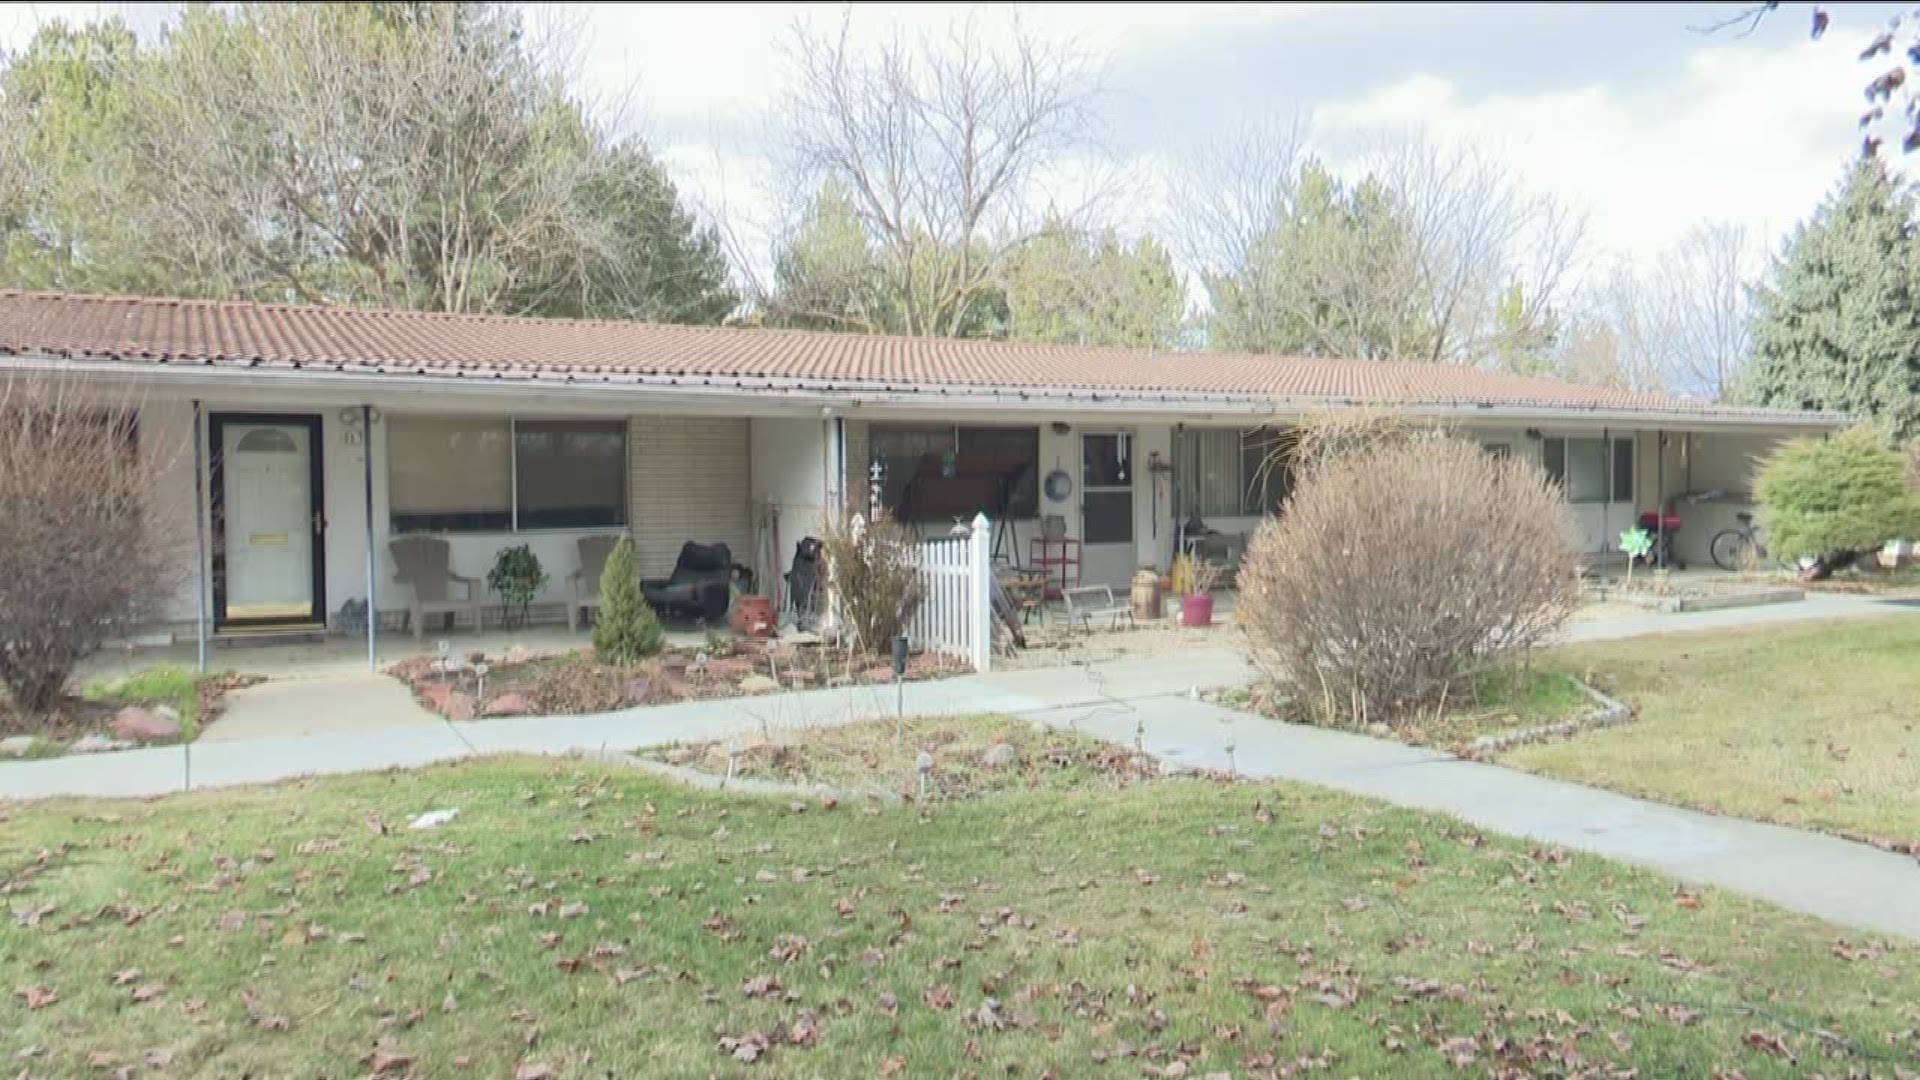 Neighbors fought back against a proposed development that would have forced them to find a new place to live.